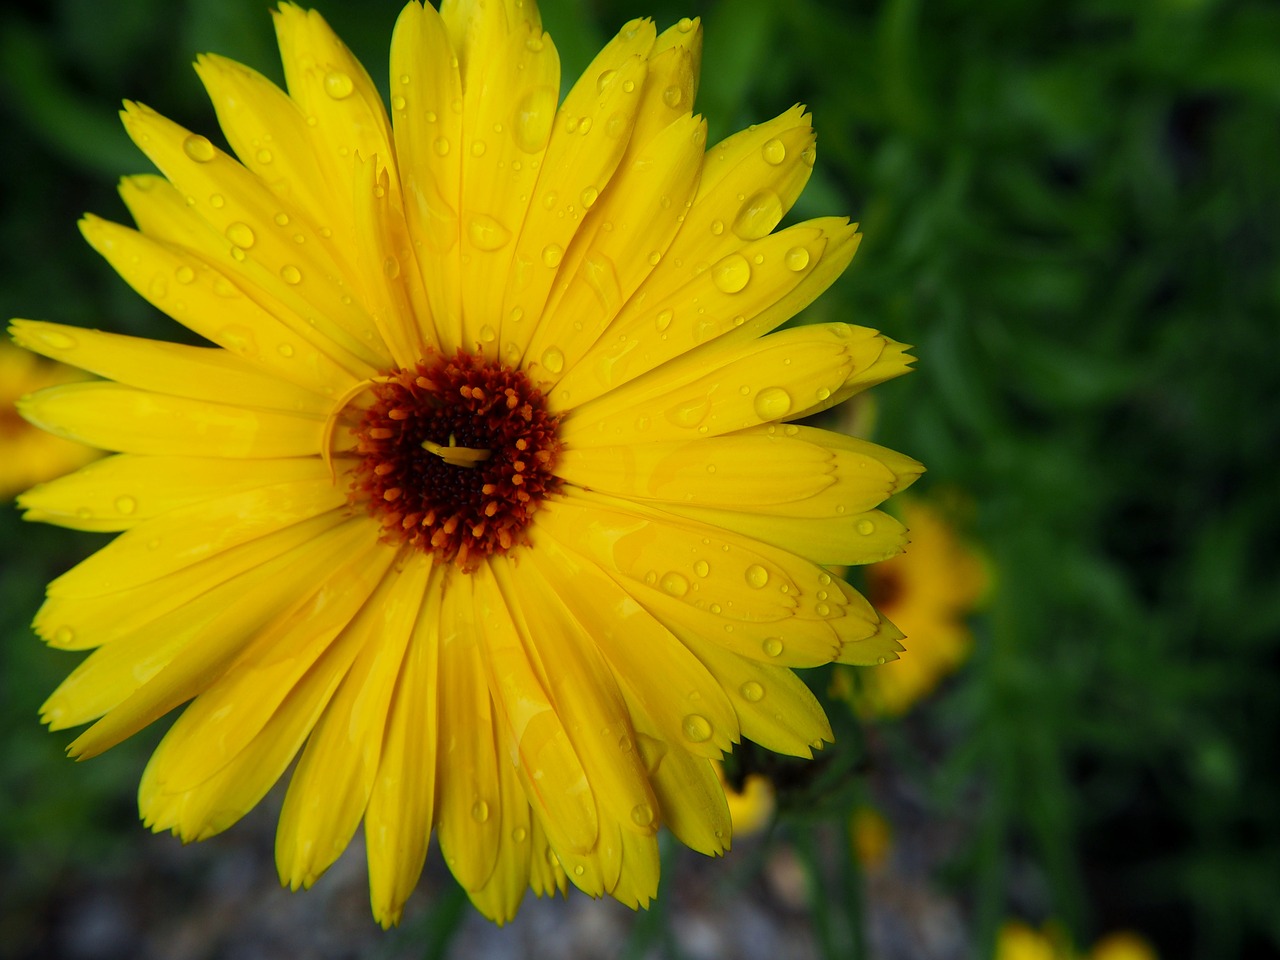 a yellow flower with water droplets on it, slight overcast weather, ari aster, photographed, yellows and reddish black